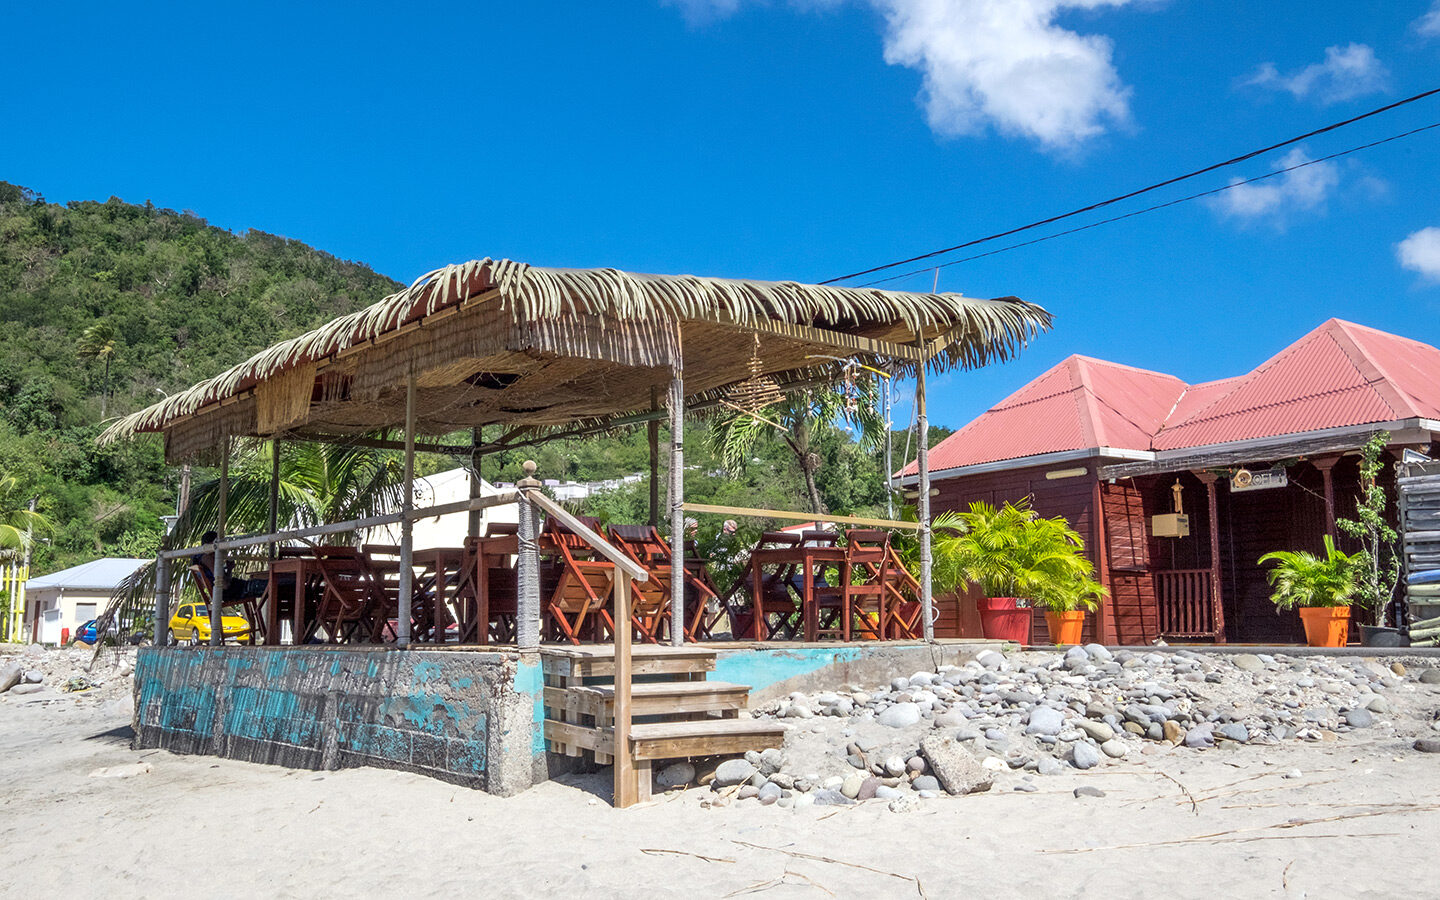 Catherine's Bar Death in Paradise filming location – aka Le Madras